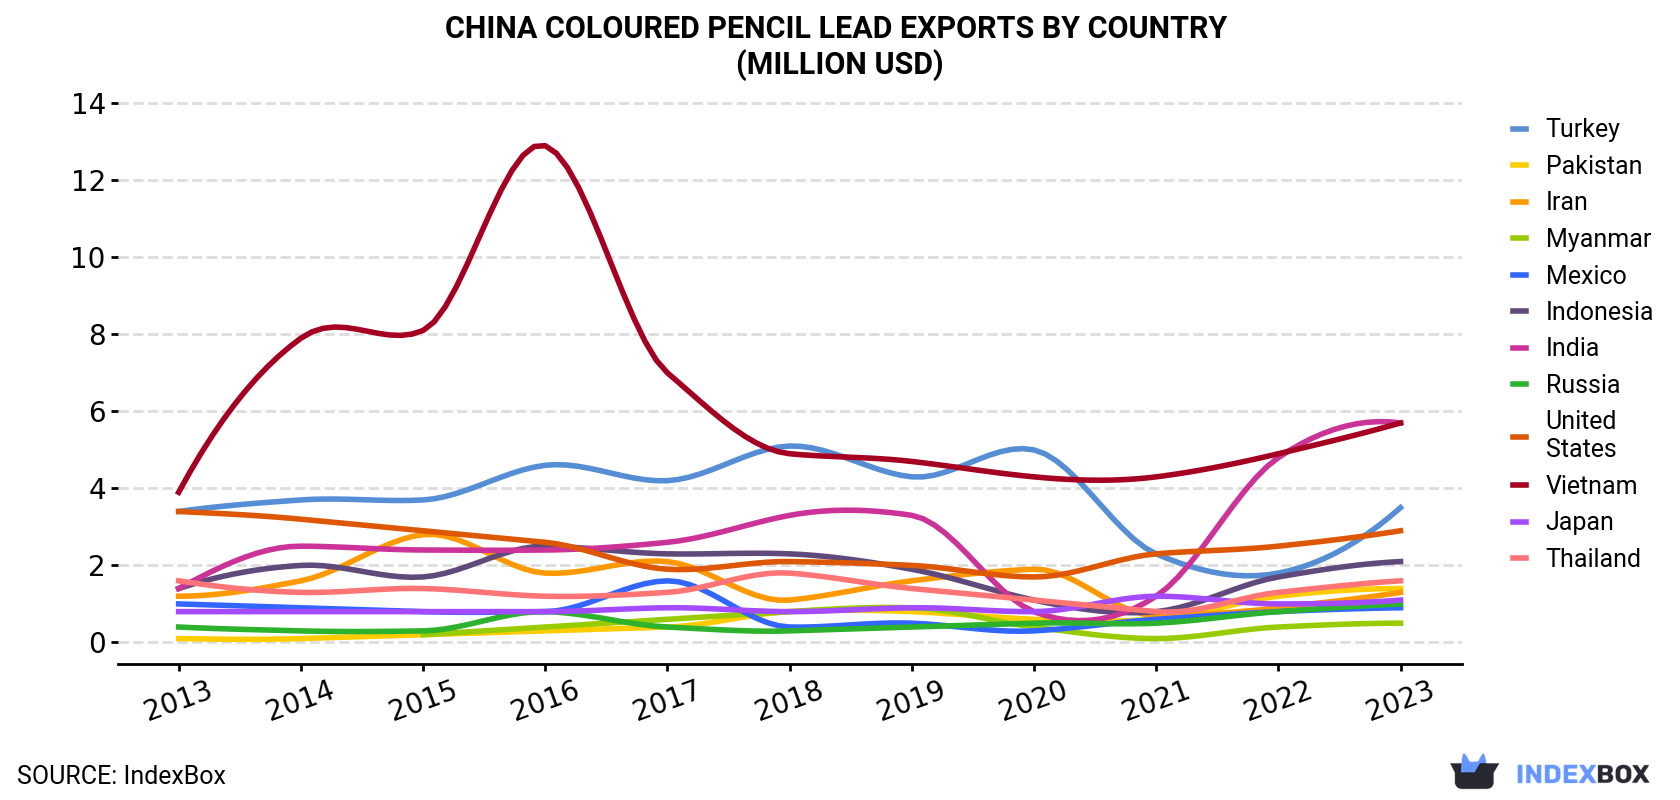 China Coloured Pencil Lead Exports By Country (Million USD)